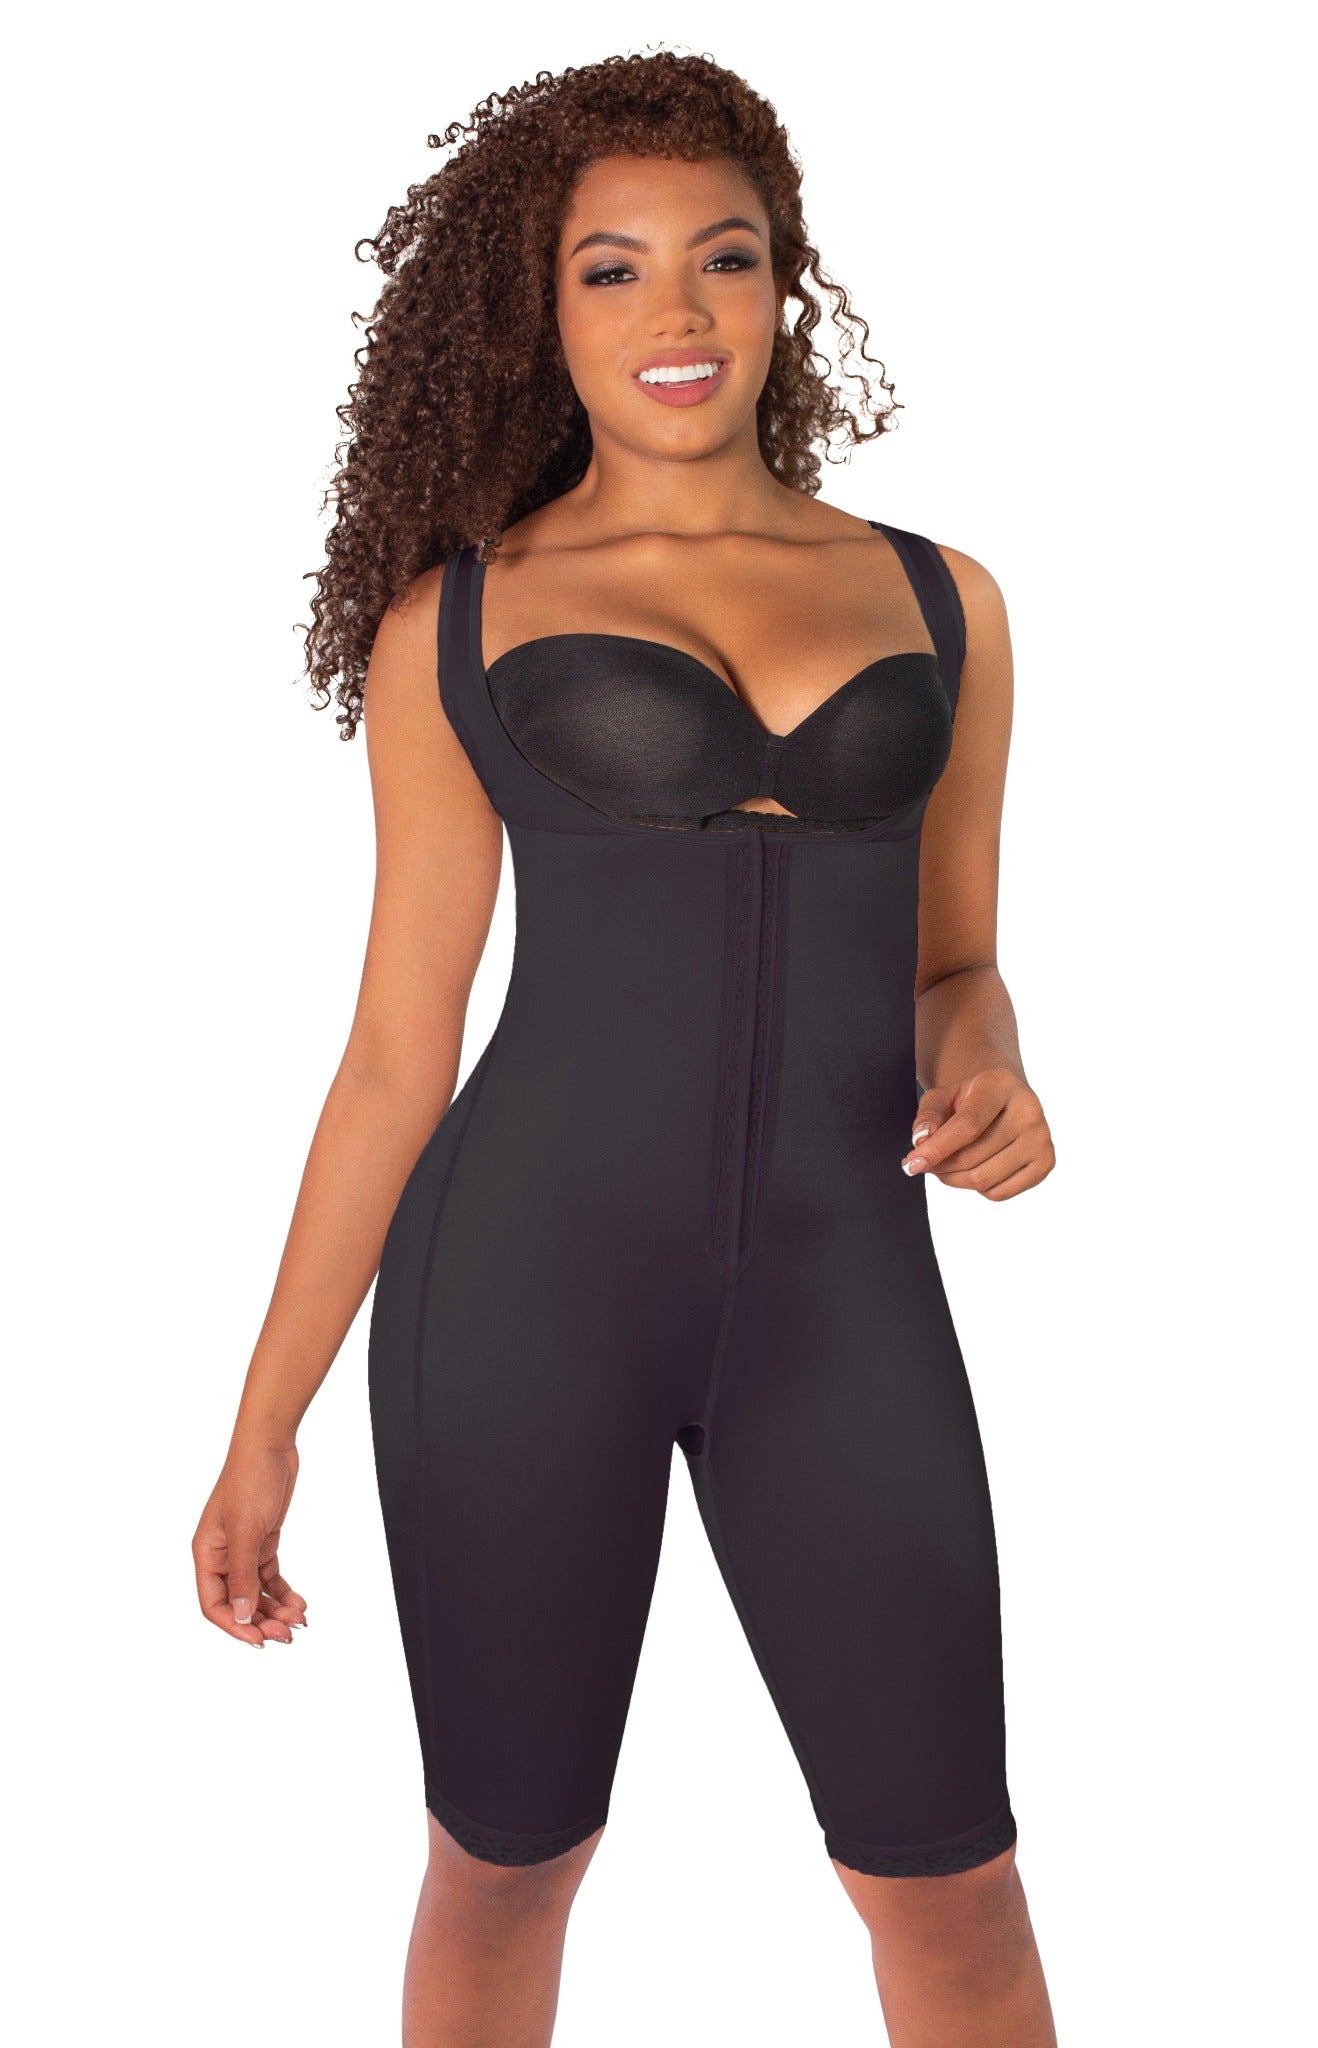 Full Body Control Suit w/ Front Closure & Back Support